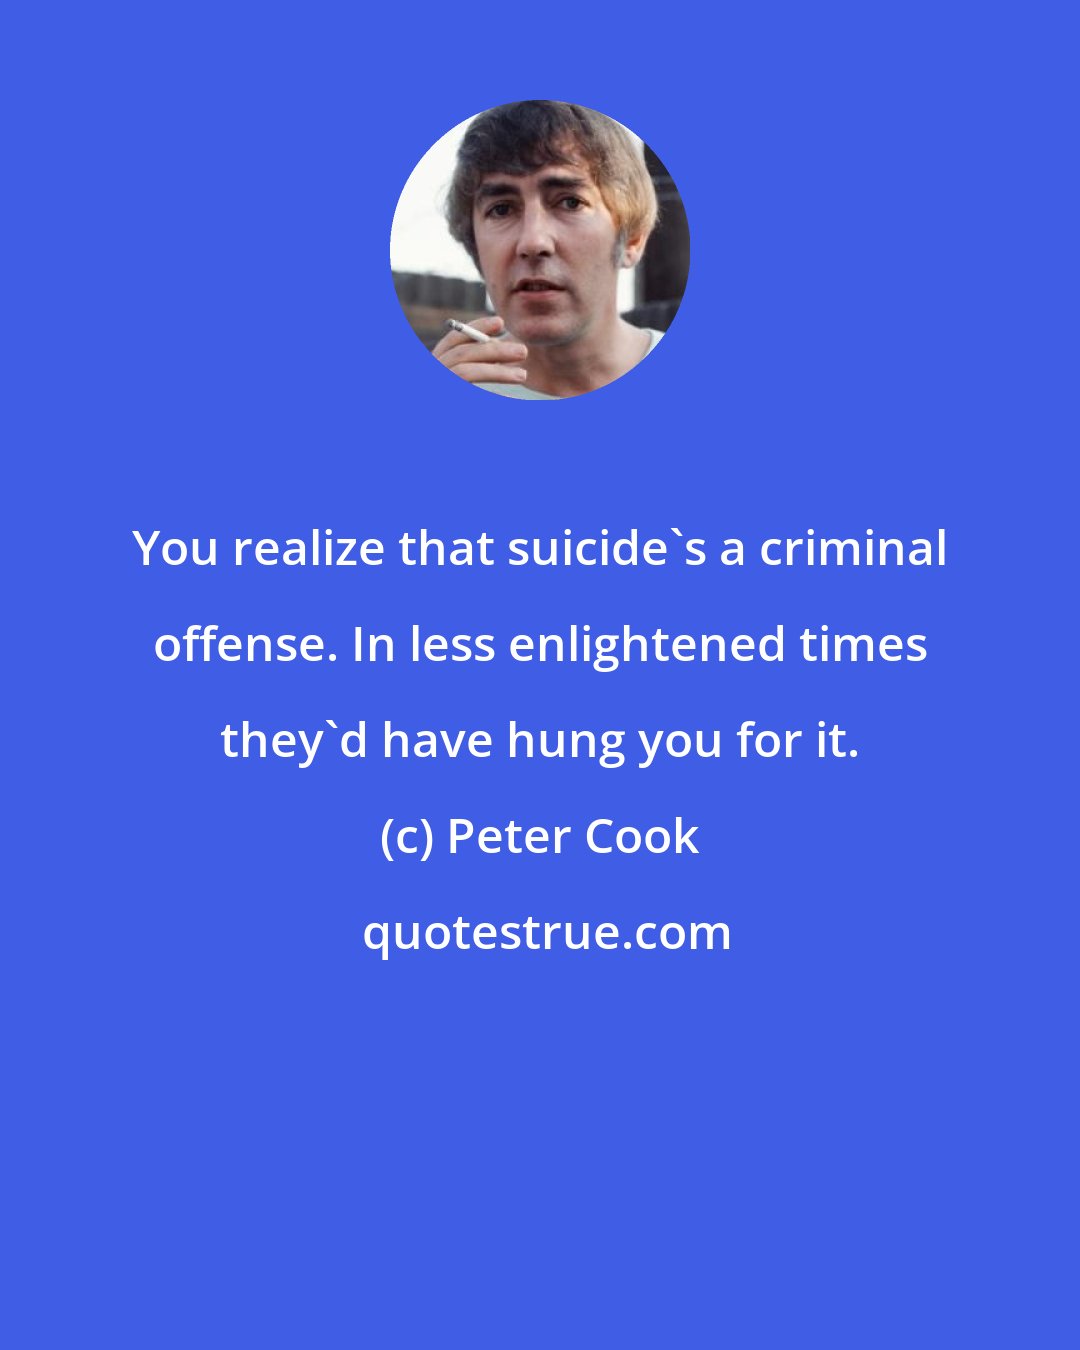 Peter Cook: You realize that suicide's a criminal offense. In less enlightened times they'd have hung you for it.